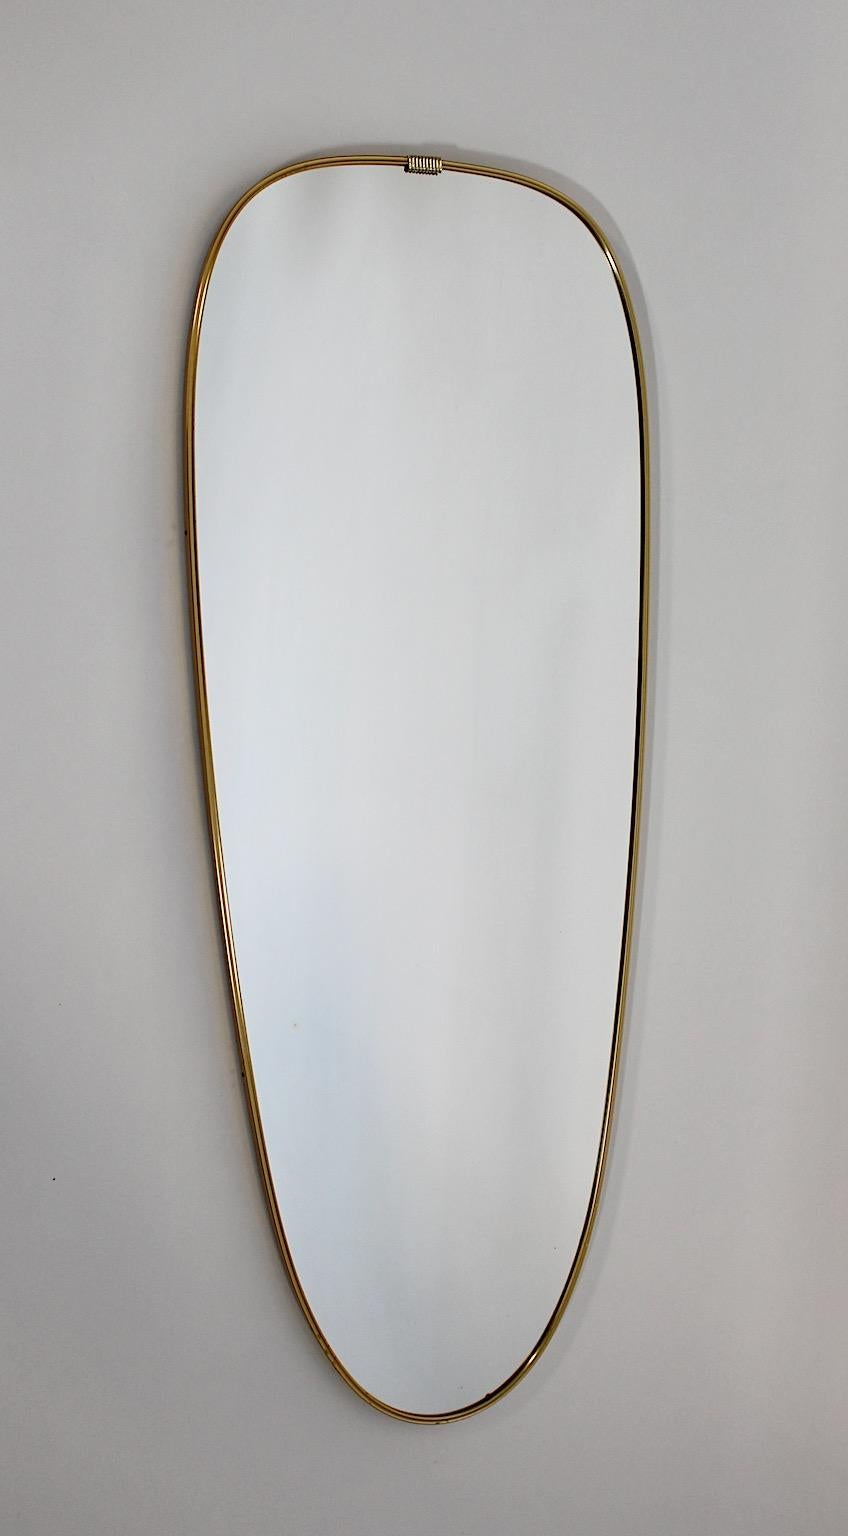 Mid Century Modern vintage full length mirror wall mirror from brass and golden metal 1950s.
An elegant full length mirror or floor mirror in simple but sophisticated conical shape with golden brass frame and a small detail at the top.
Backside one